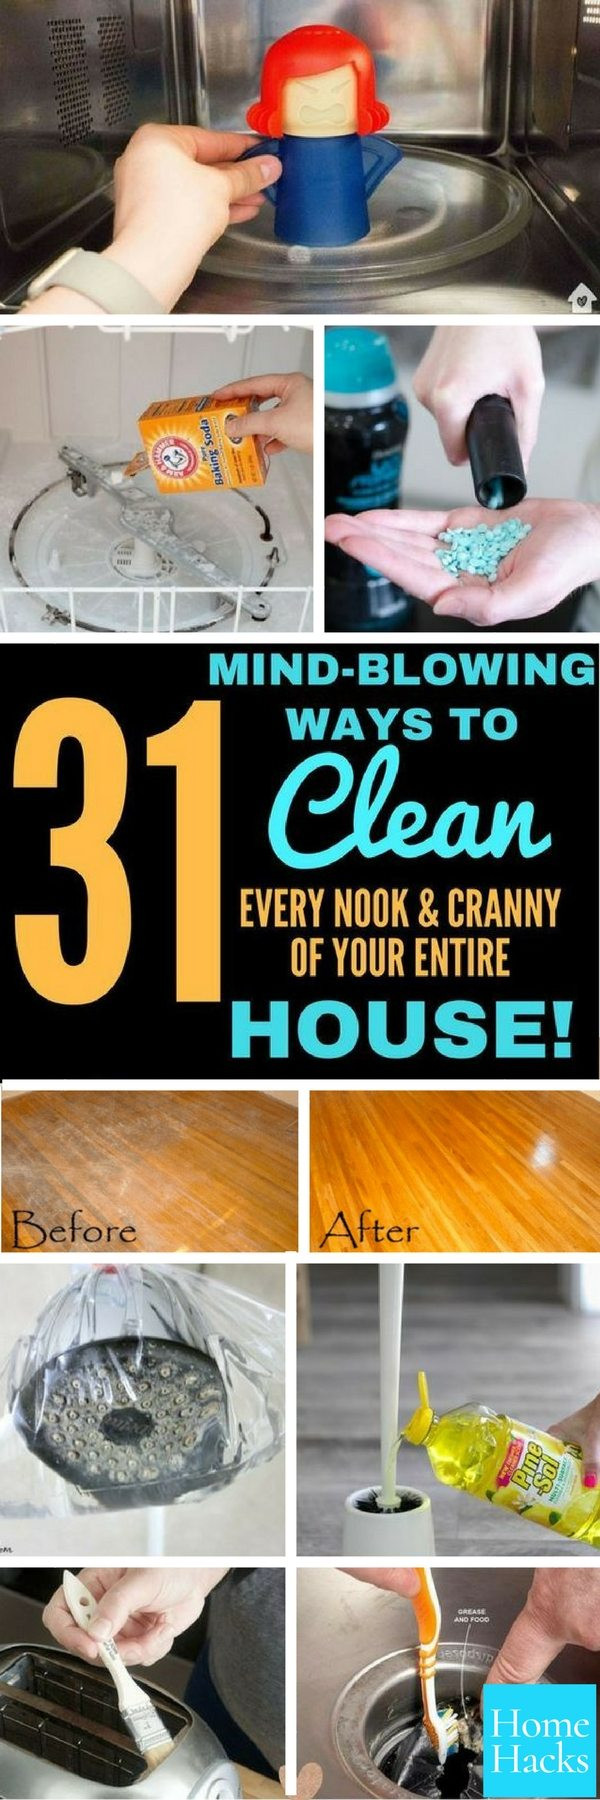 15 Fantastic Hardwood Floor Cleaning Services Los Angeles 2023 free download hardwood floor cleaning services los angeles of 31 house cleaning tips you need to know now inside of life and lisa source of life and lisa